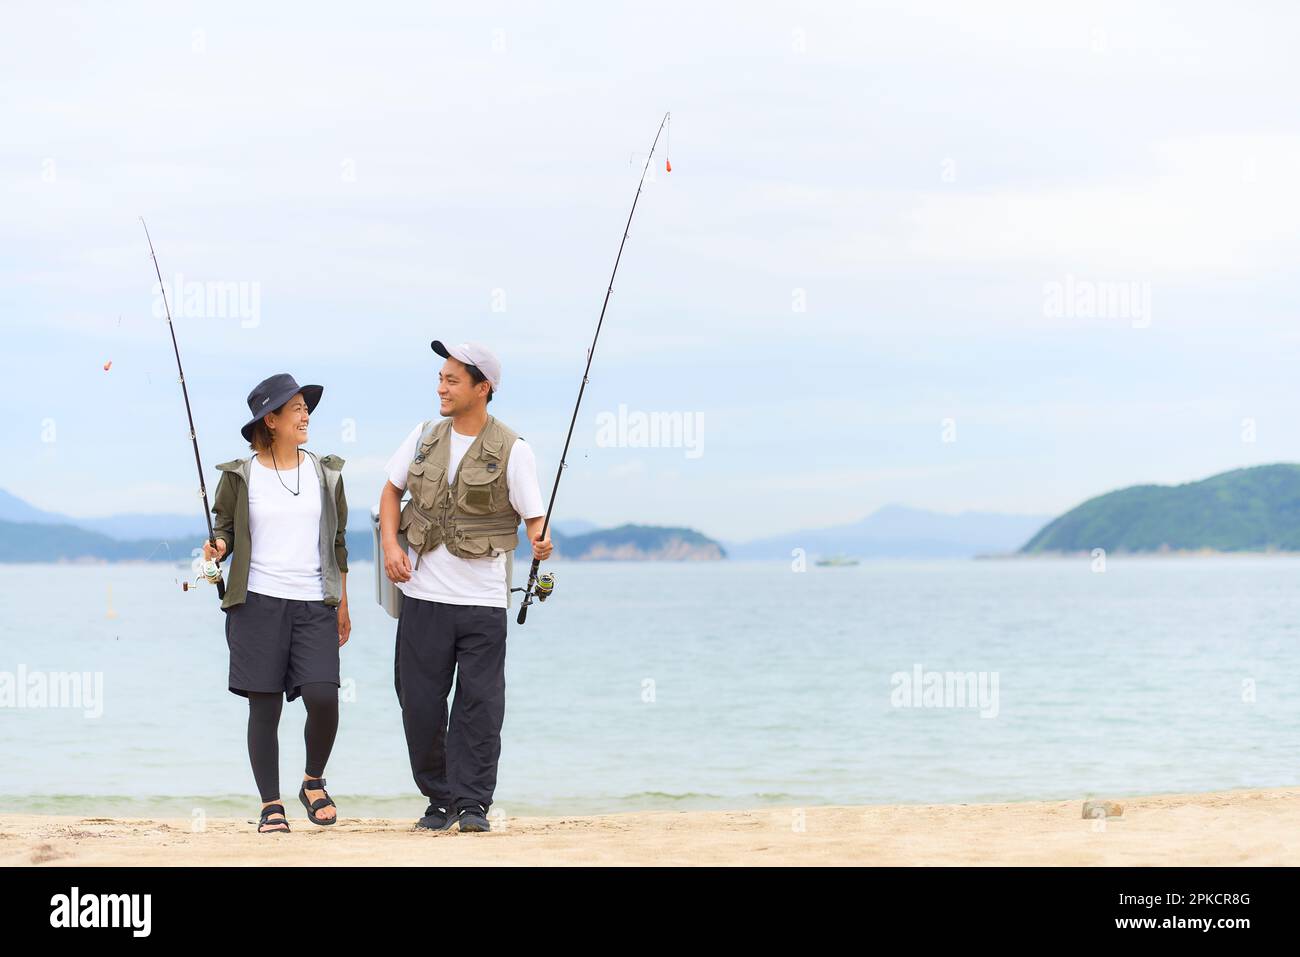 Men and women walking on the beach with fishing gear Stock Photo